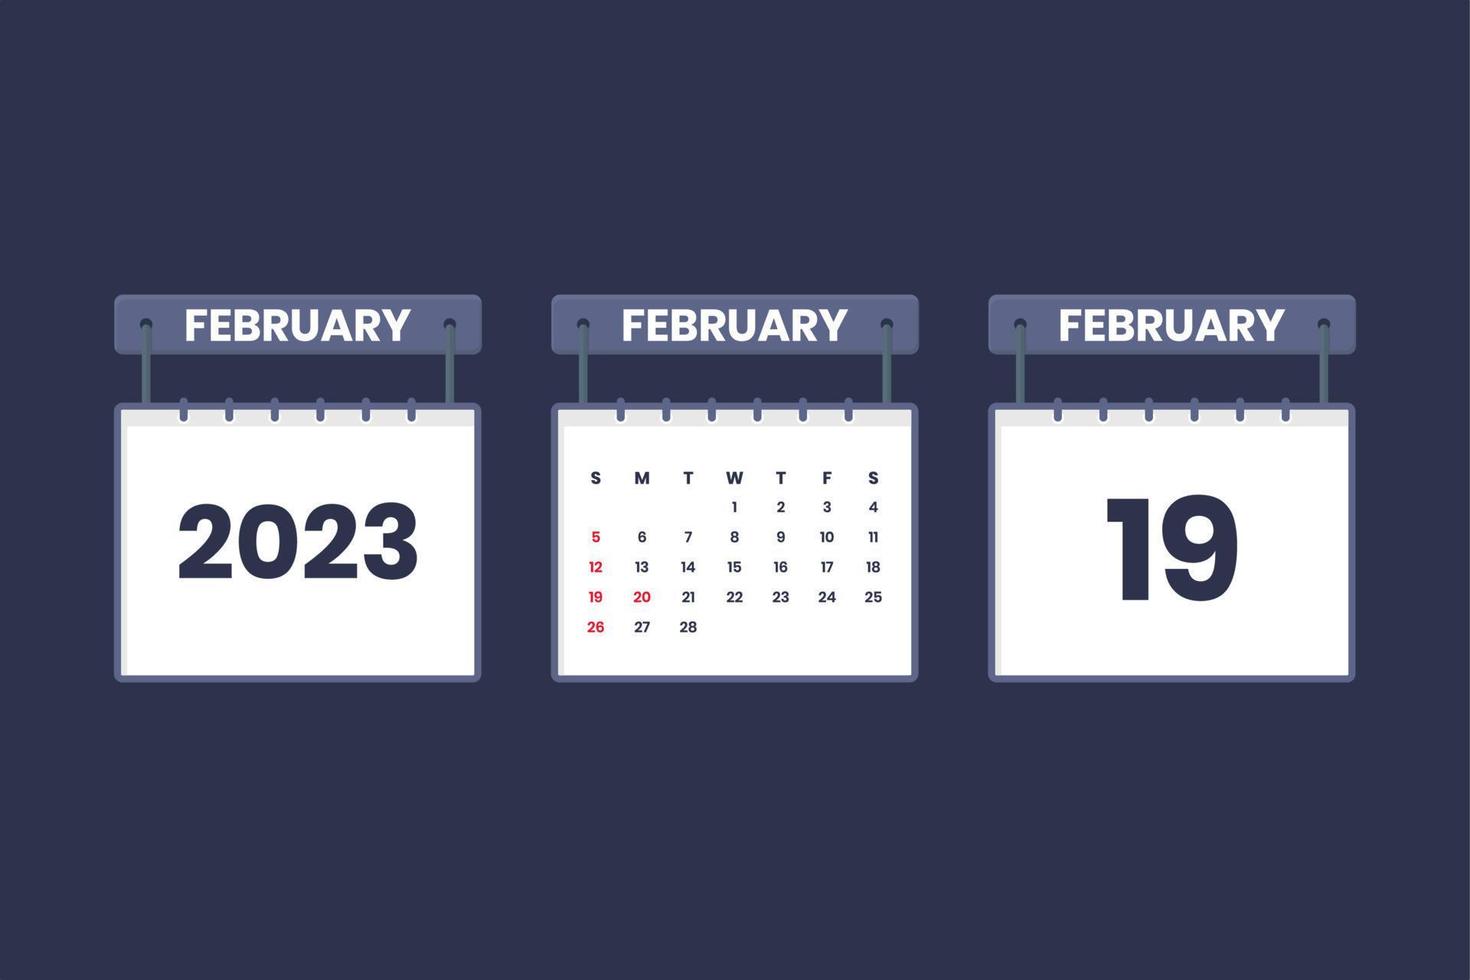 19 February 2023 calendar icon for schedule, appointment, important date concept vector